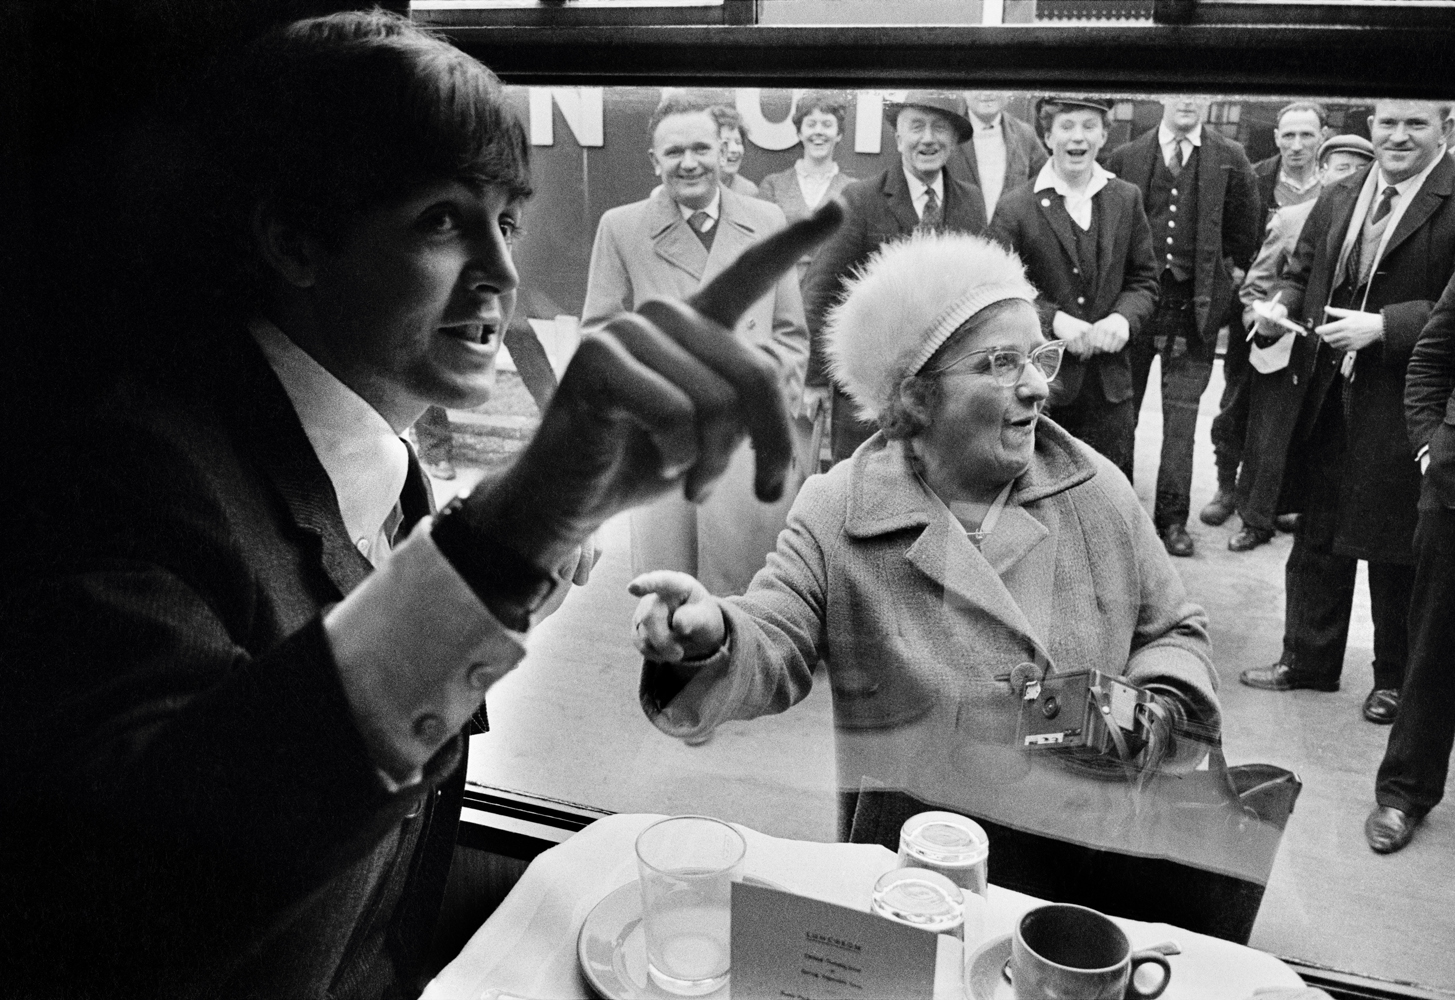 The Beatles during filming of 'A Hard Days Night'. The Beatles film was primarily shot on a moving train. Fan recognizing Paul McCartney. London, England, 1964.